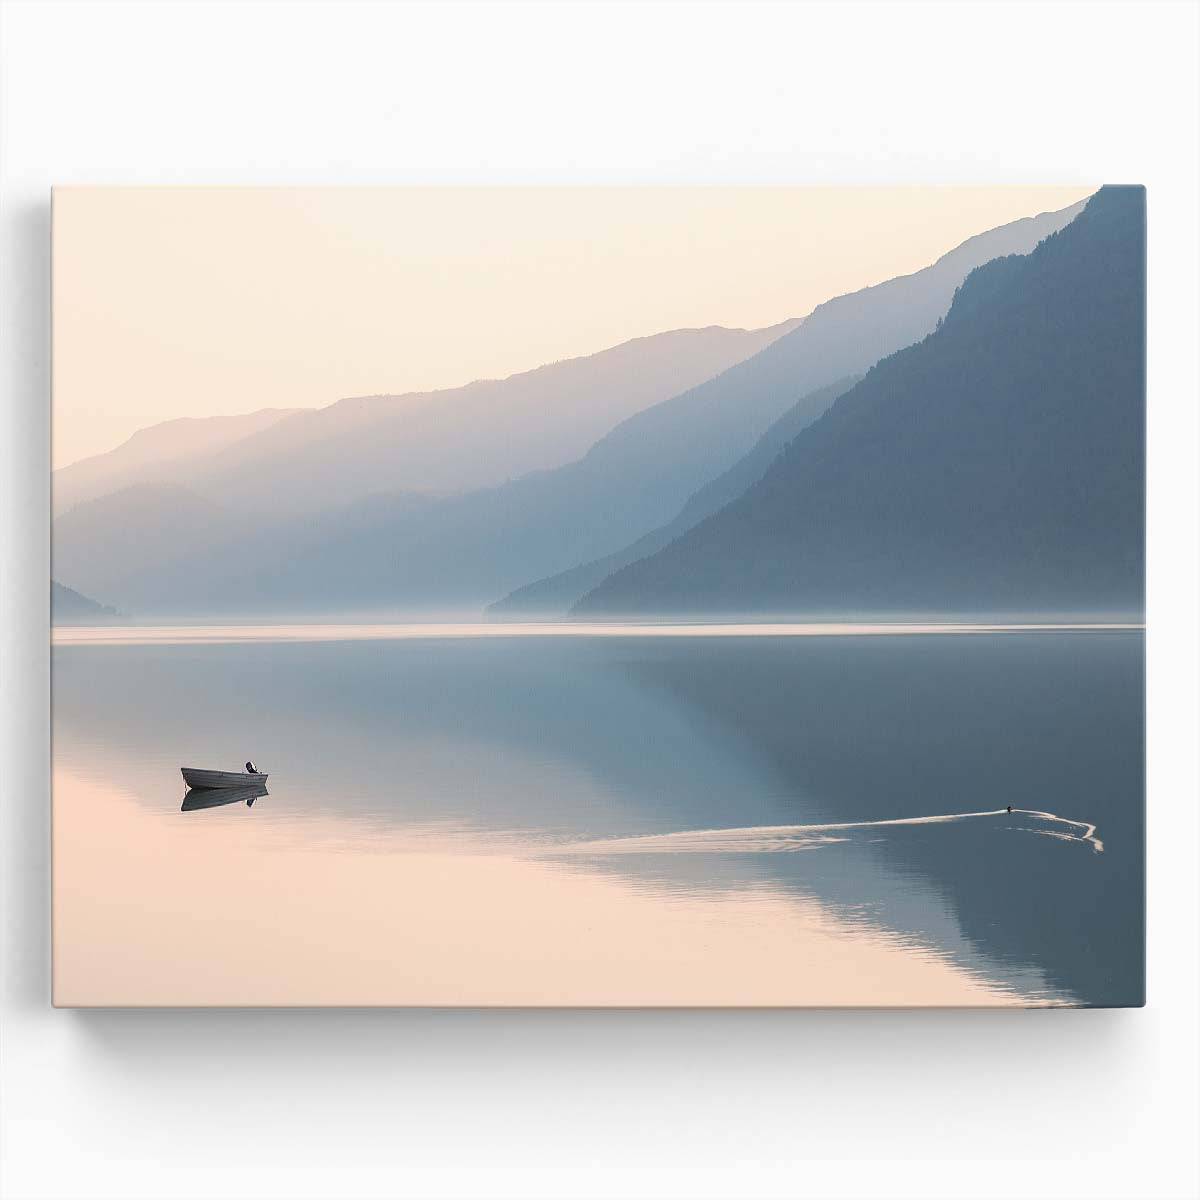 Serene Norway Lake & Mountain Landscape Photo Art Wall Art by Luxuriance Designs. Made in USA.